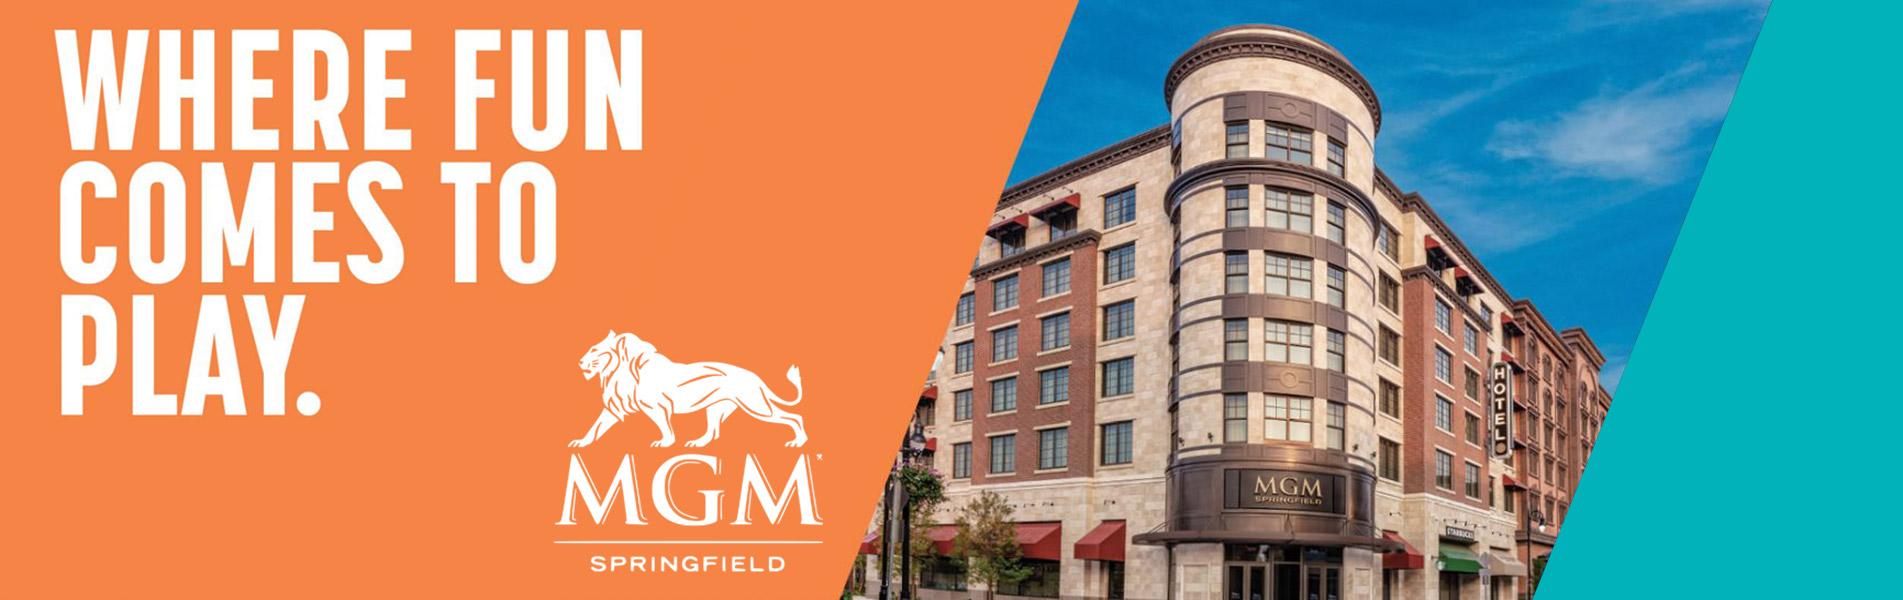 team springfield mgm slider scaled enter to win